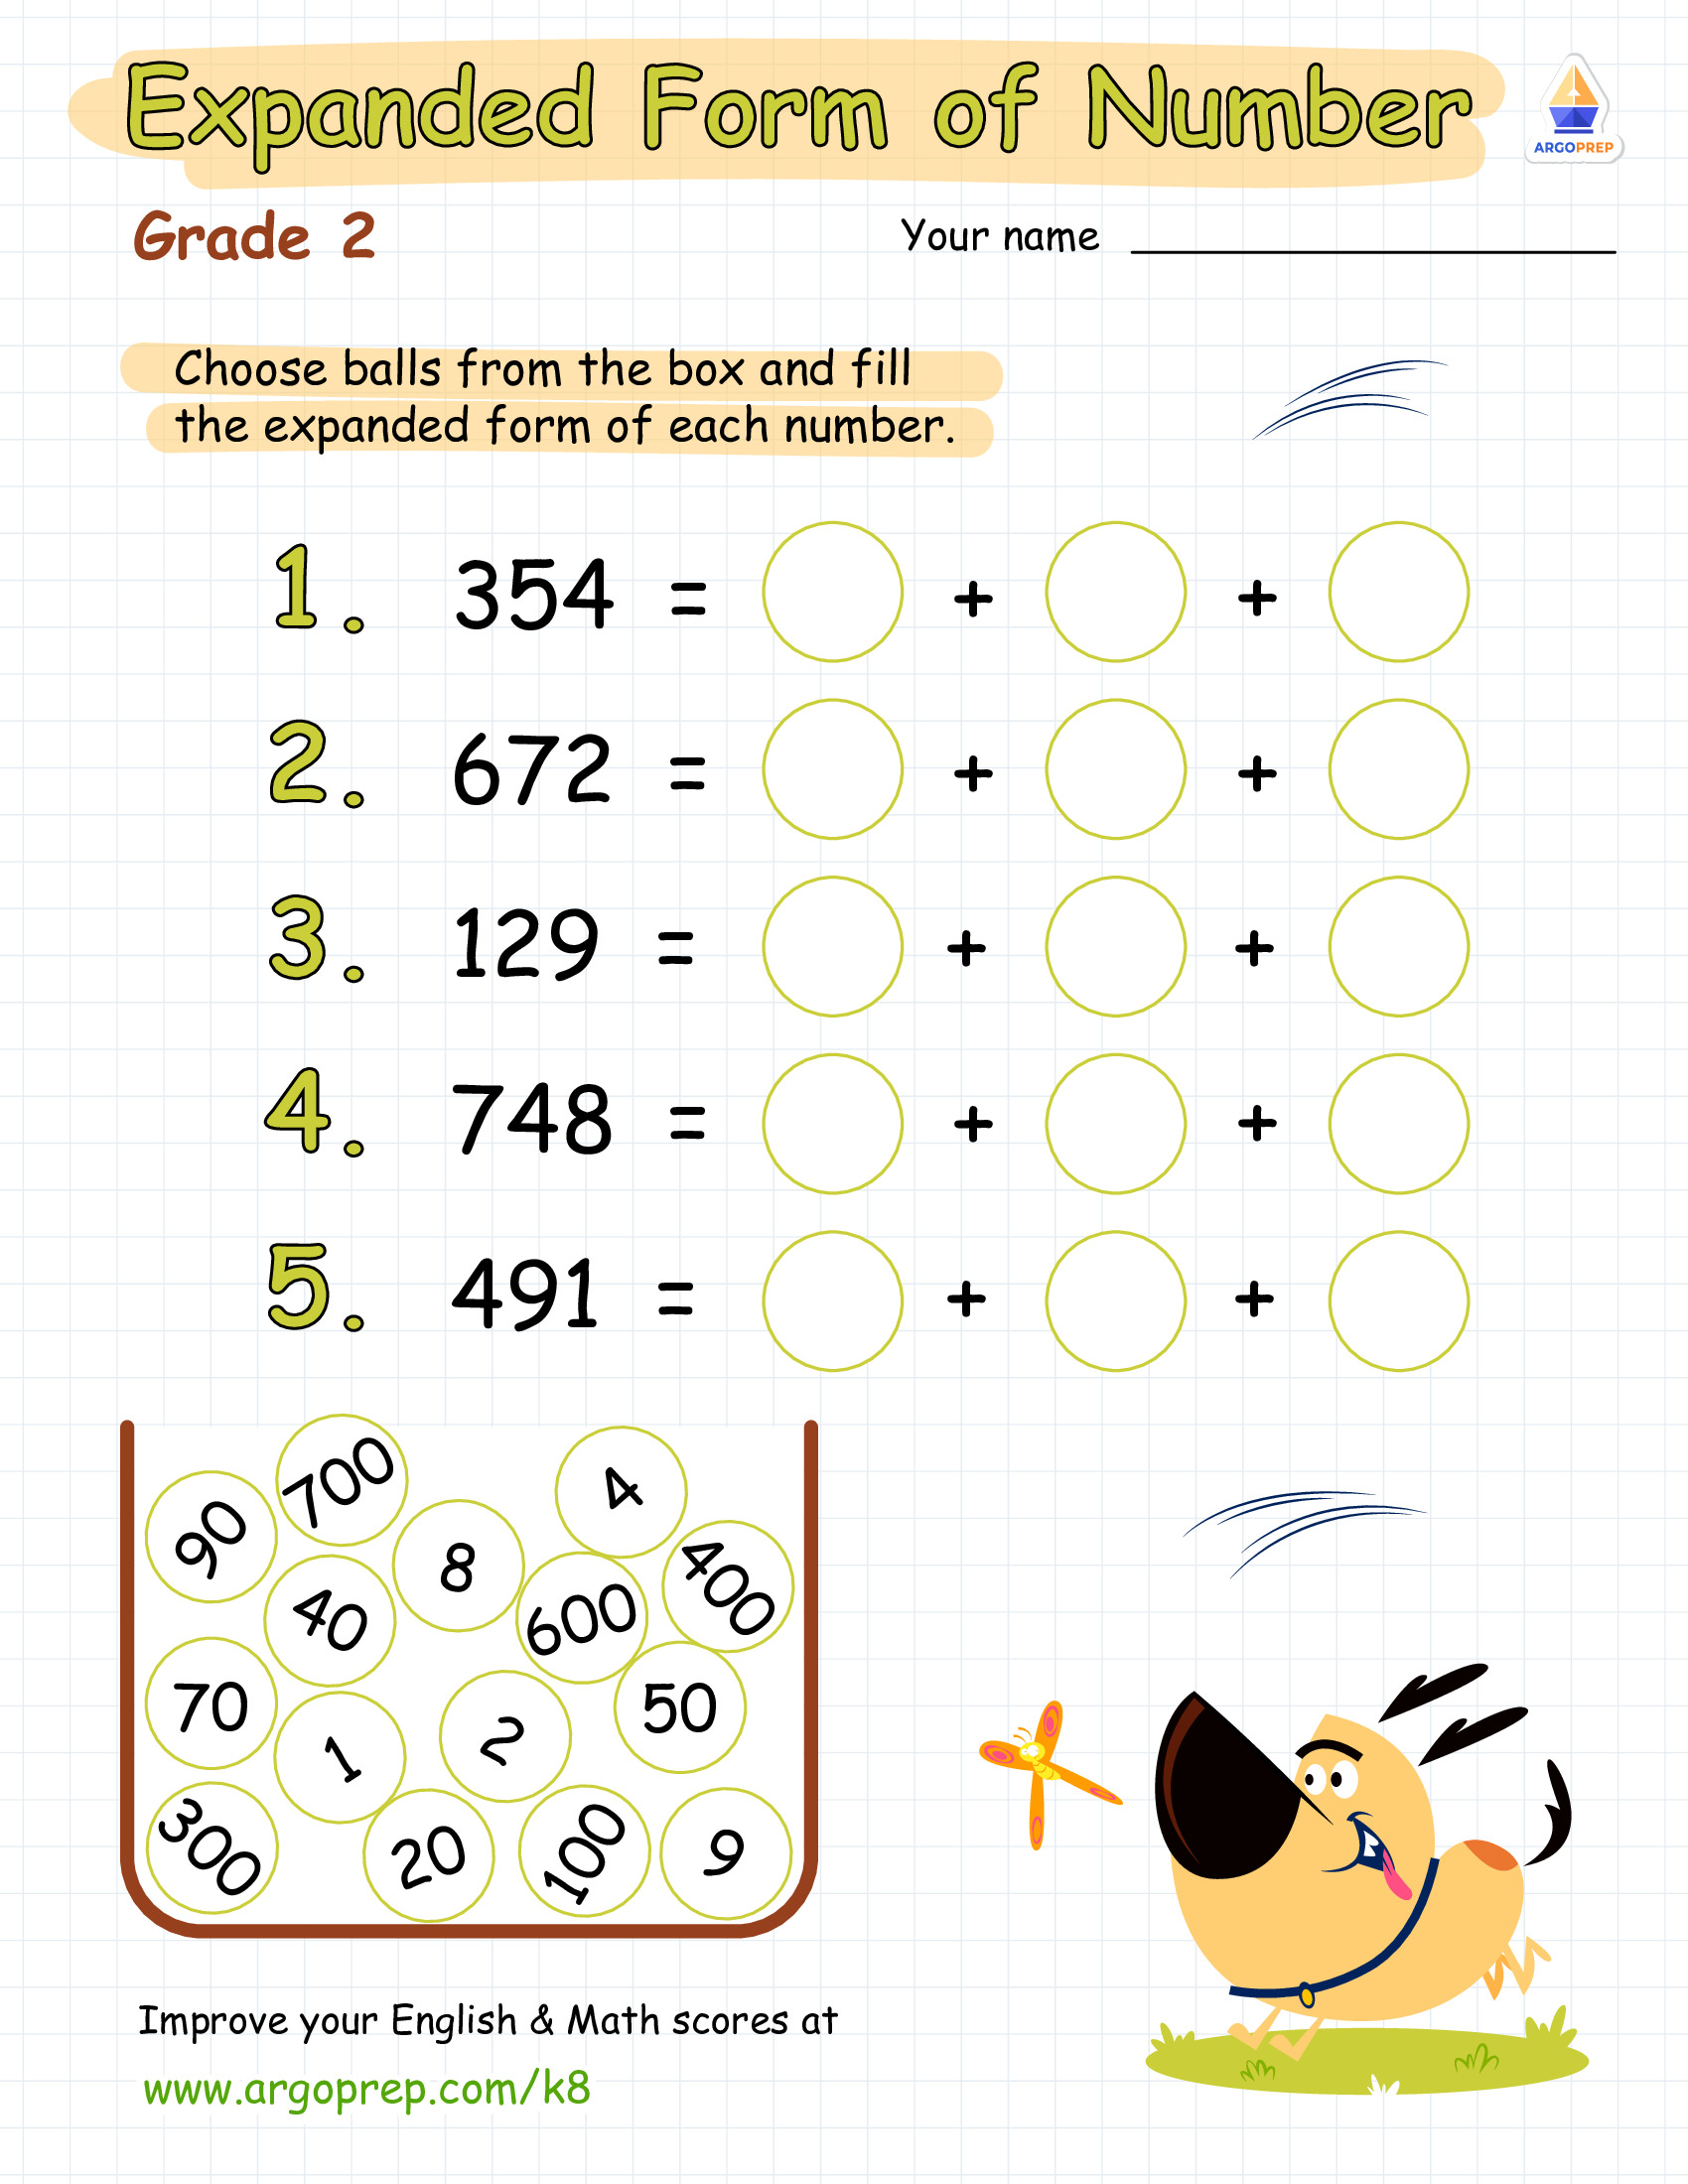 free-printable-number-flash-cards-math-expanded-form-printable-forms-free-online